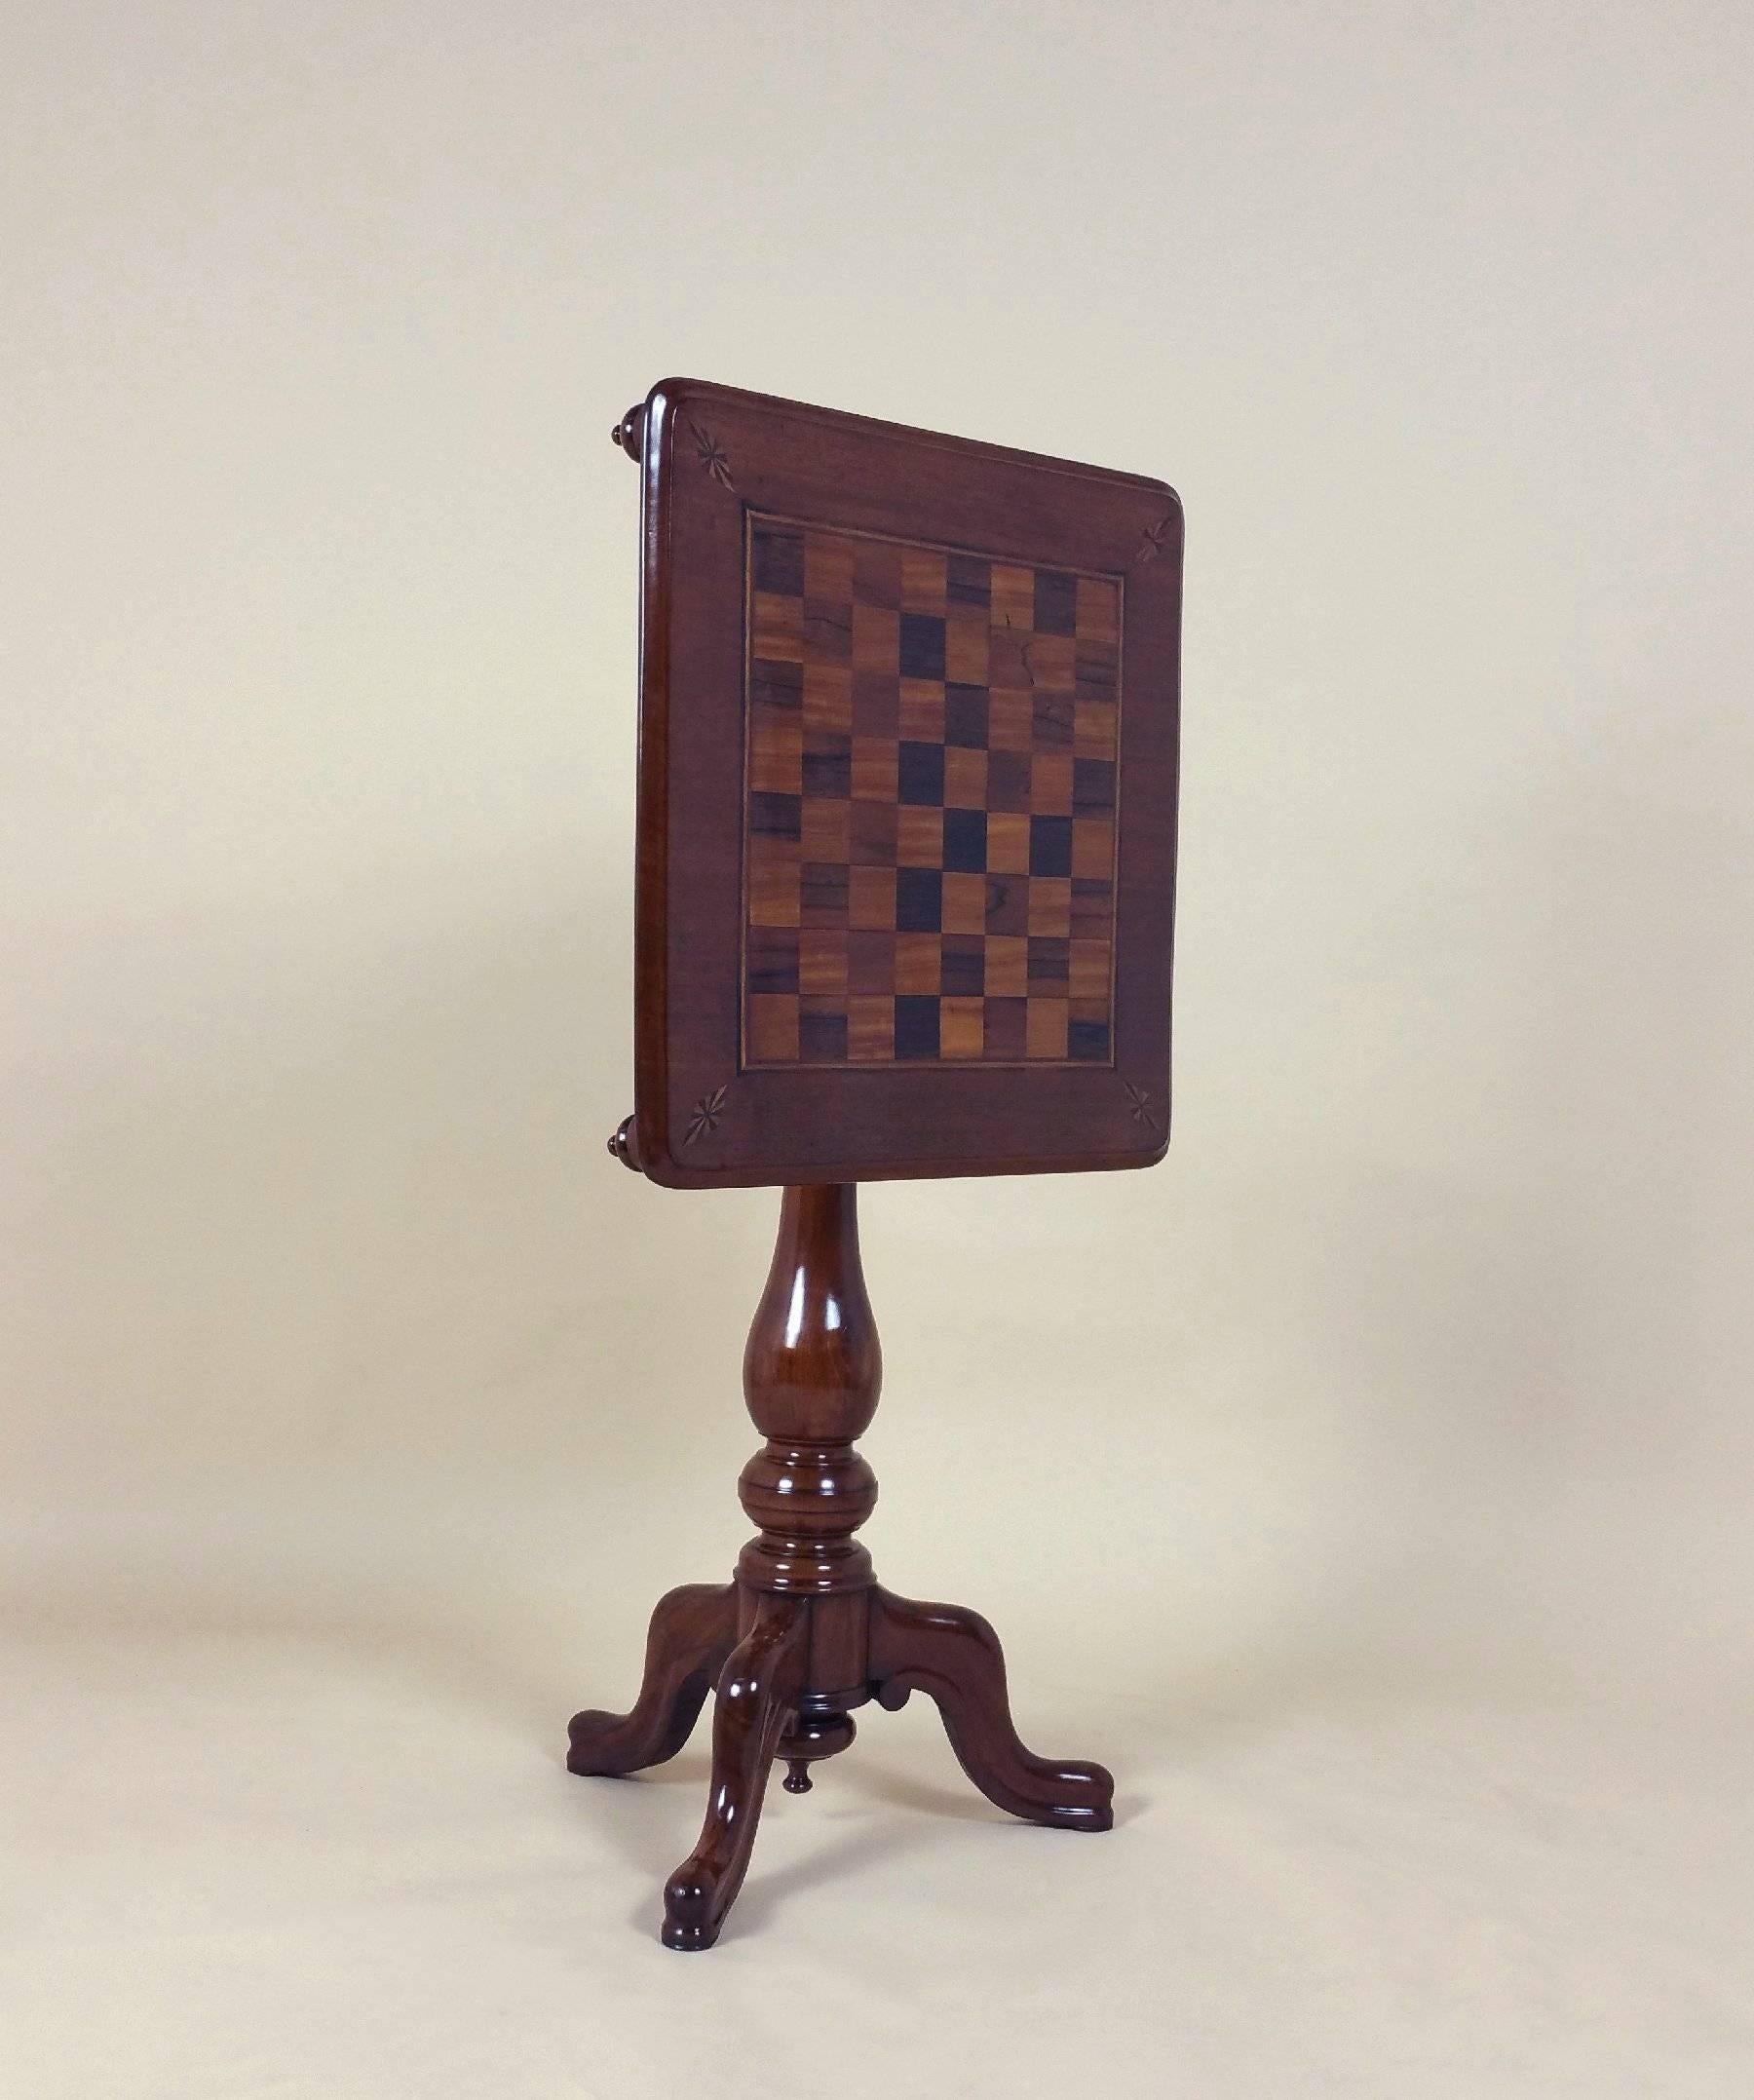 This very attractive and delightful Victorian mahogany tilt-top chess table features a satinwood and rosewood check board inlay design and corner detailing, set on a tripod support with very ornate, turned corner decoration underneath. The tabletop